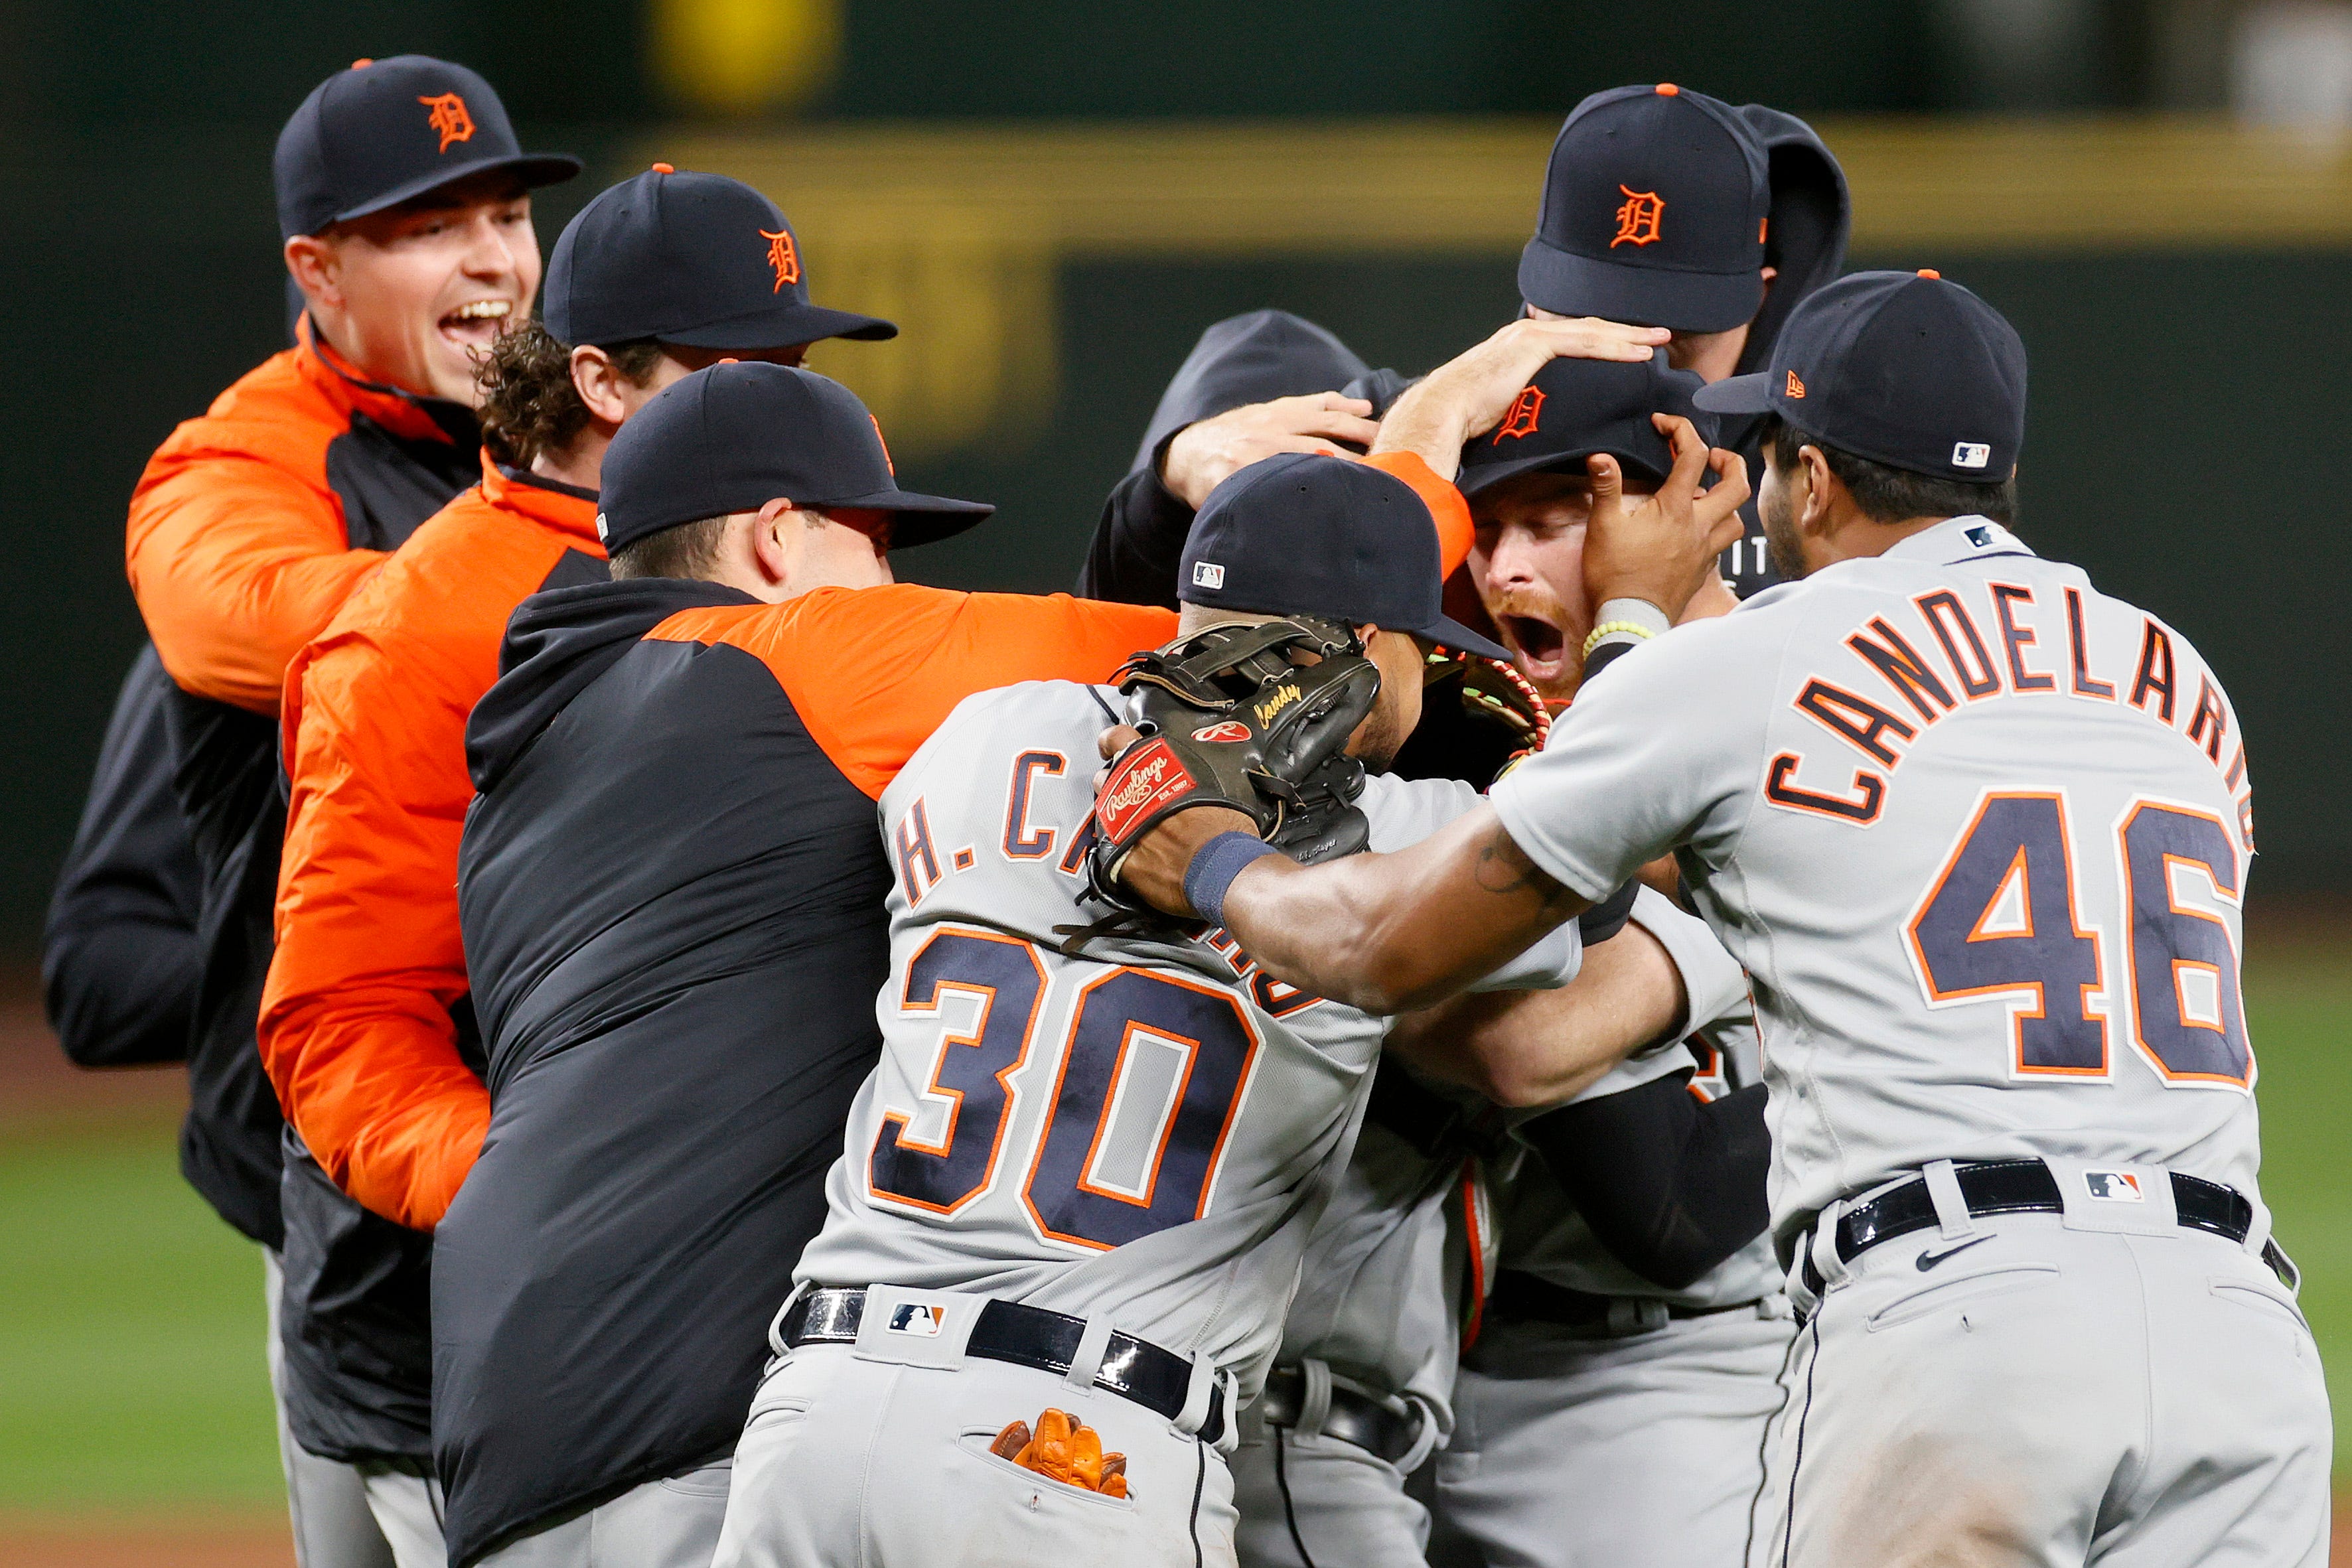 Spencer Turnbull of the Detroit Tigers celebrates with his teammates after his no-hitter against the Seattle Mariners at T-Mobile Park on May 18, 2021 in Seattle